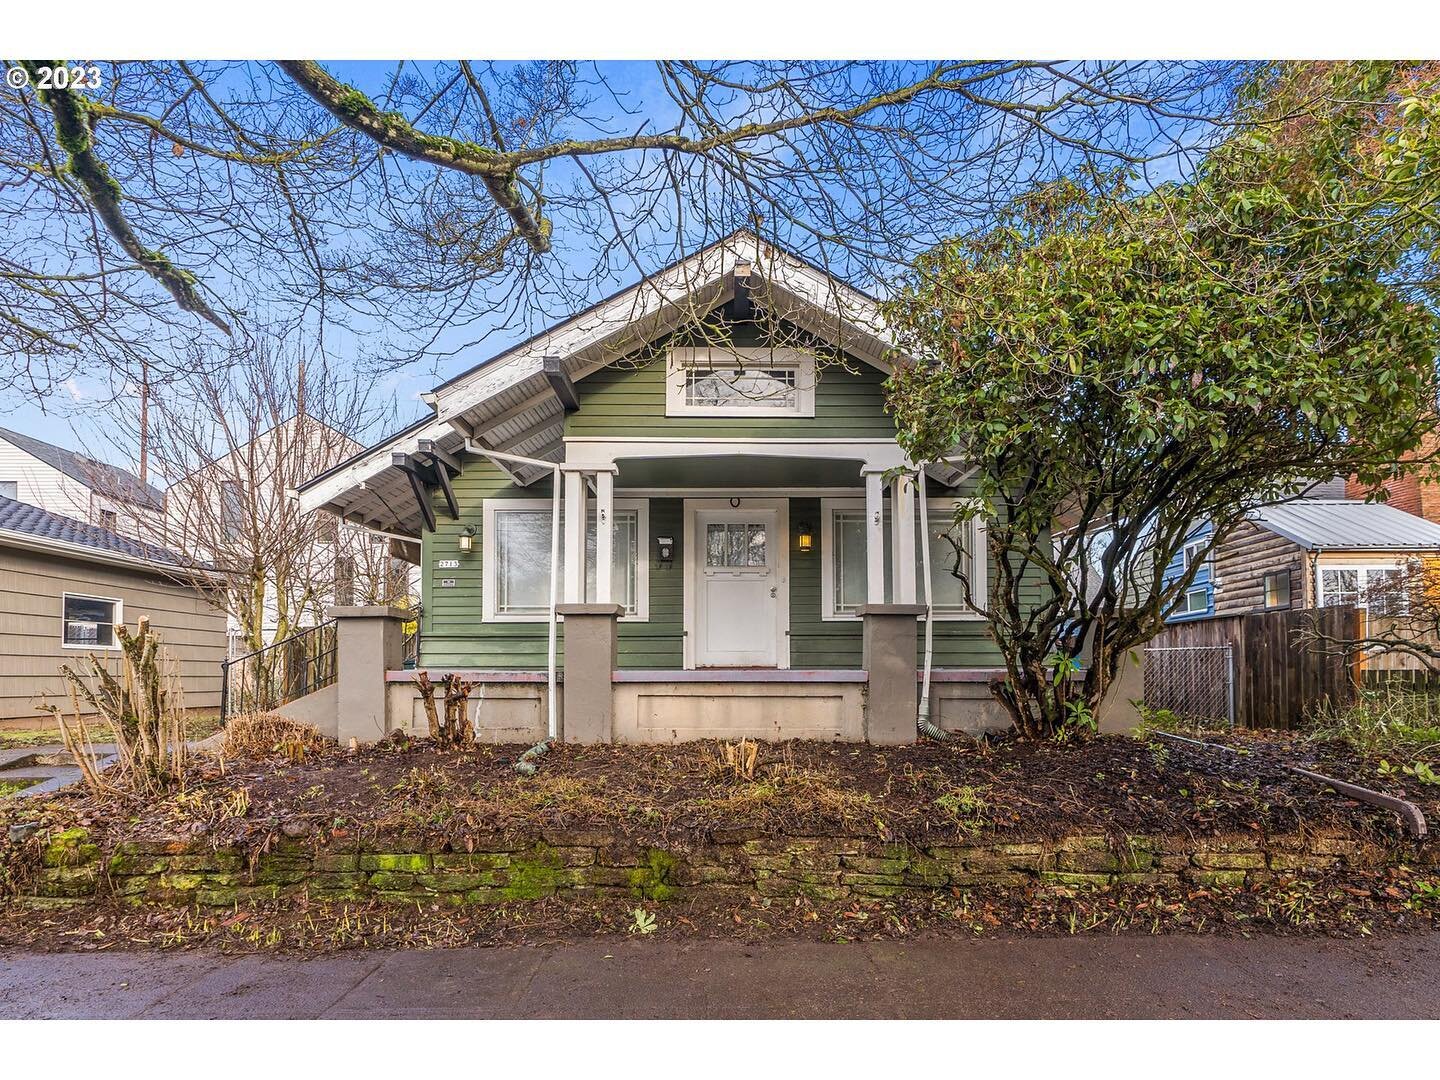 In my effort to bring more cool people to my neck of the woods, I present to you this super sweet bungalow on one of Overlook&rsquo;s best streets that was just listed for under $500k. We saw more buyers out last weekend and some multiple offer situa